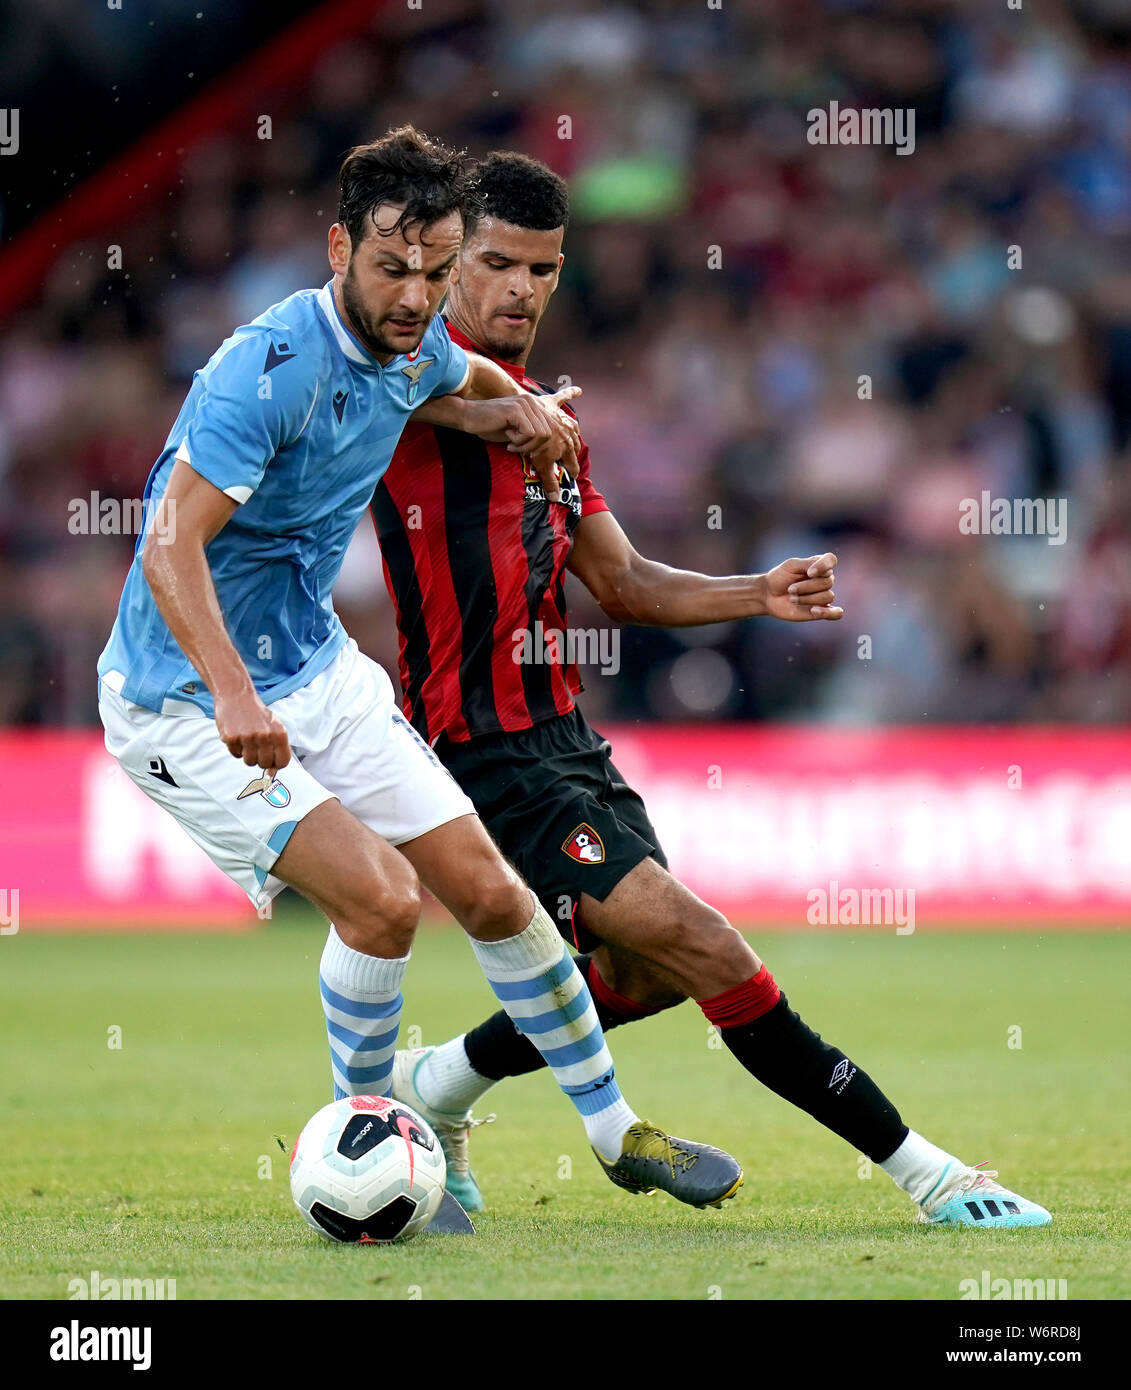 Lazio's Marco Parolo battles for possession of the ball with Bournemouth's Dominic Solanke, (right) during the Pre-Season match at the Vitality Stadium, Bournemouth. Stock Photo